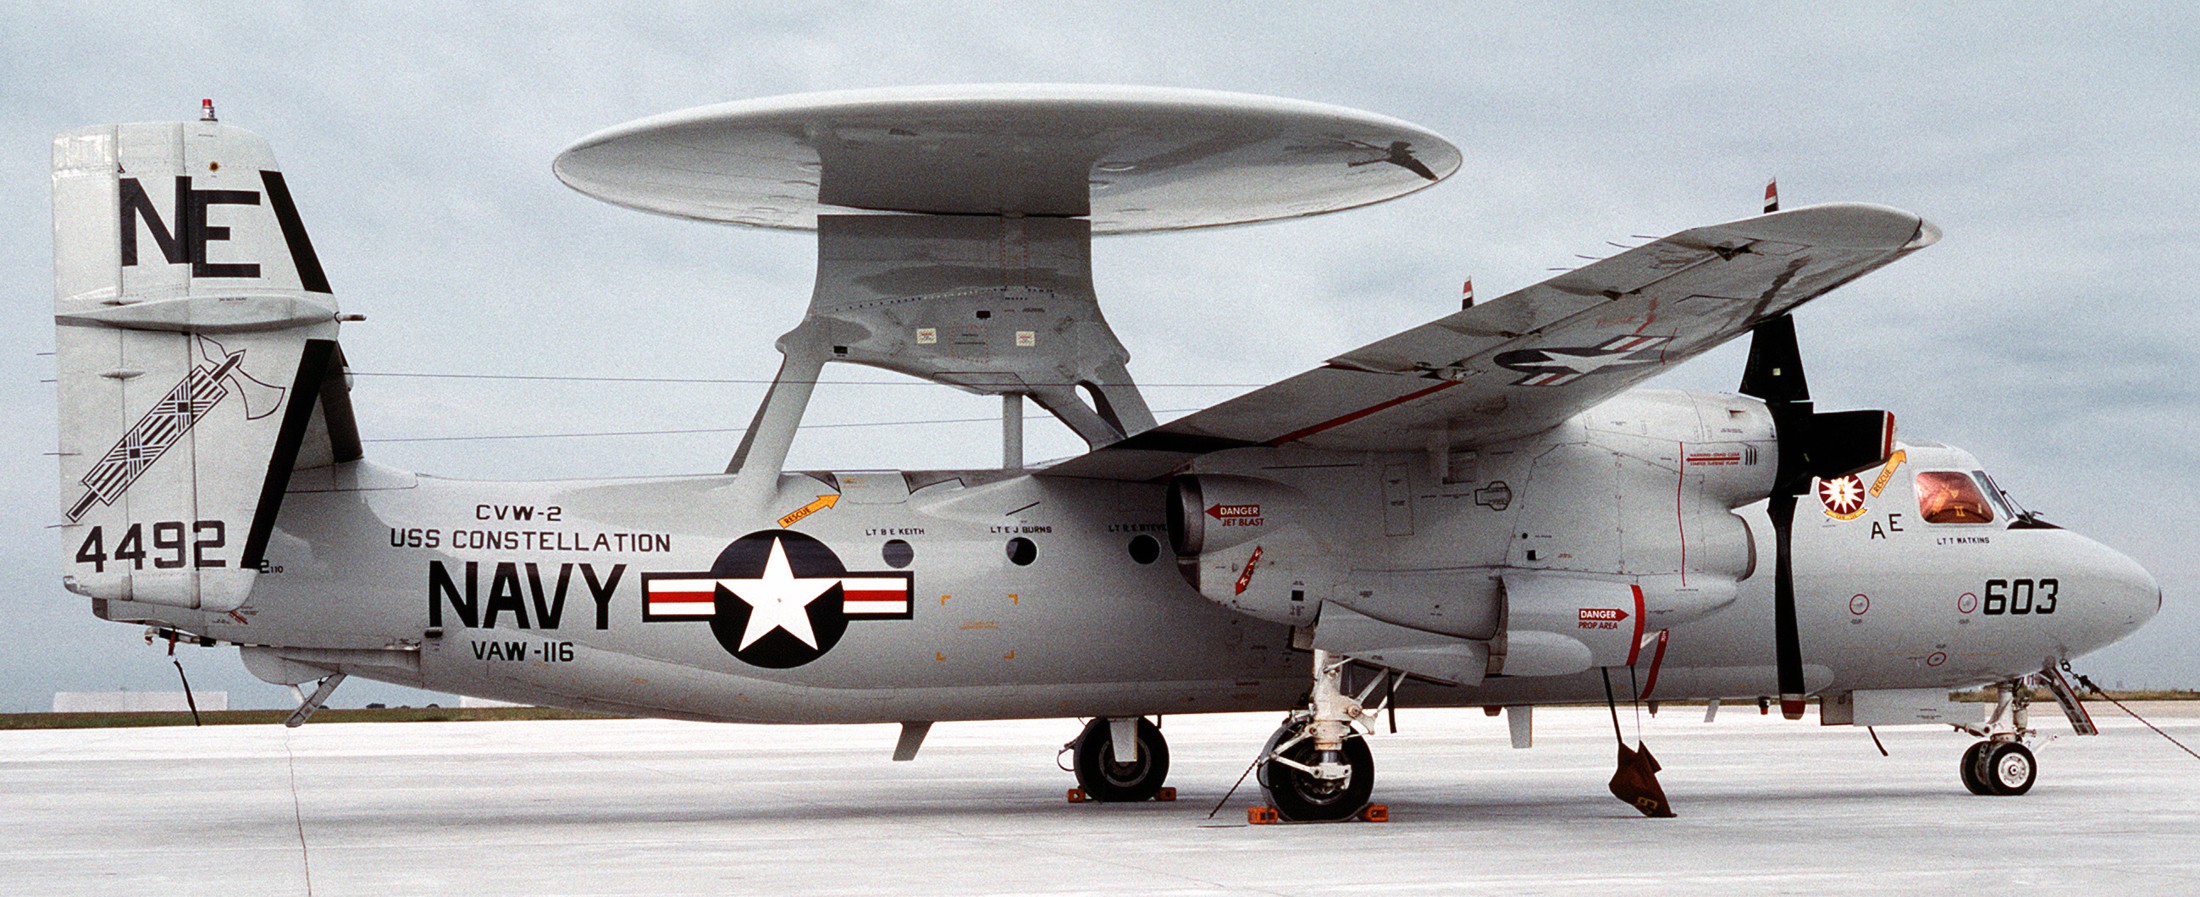 vaw-116 sun kings airborne command control squadron carrier early warning cvw-2 andrews afb maryland 121